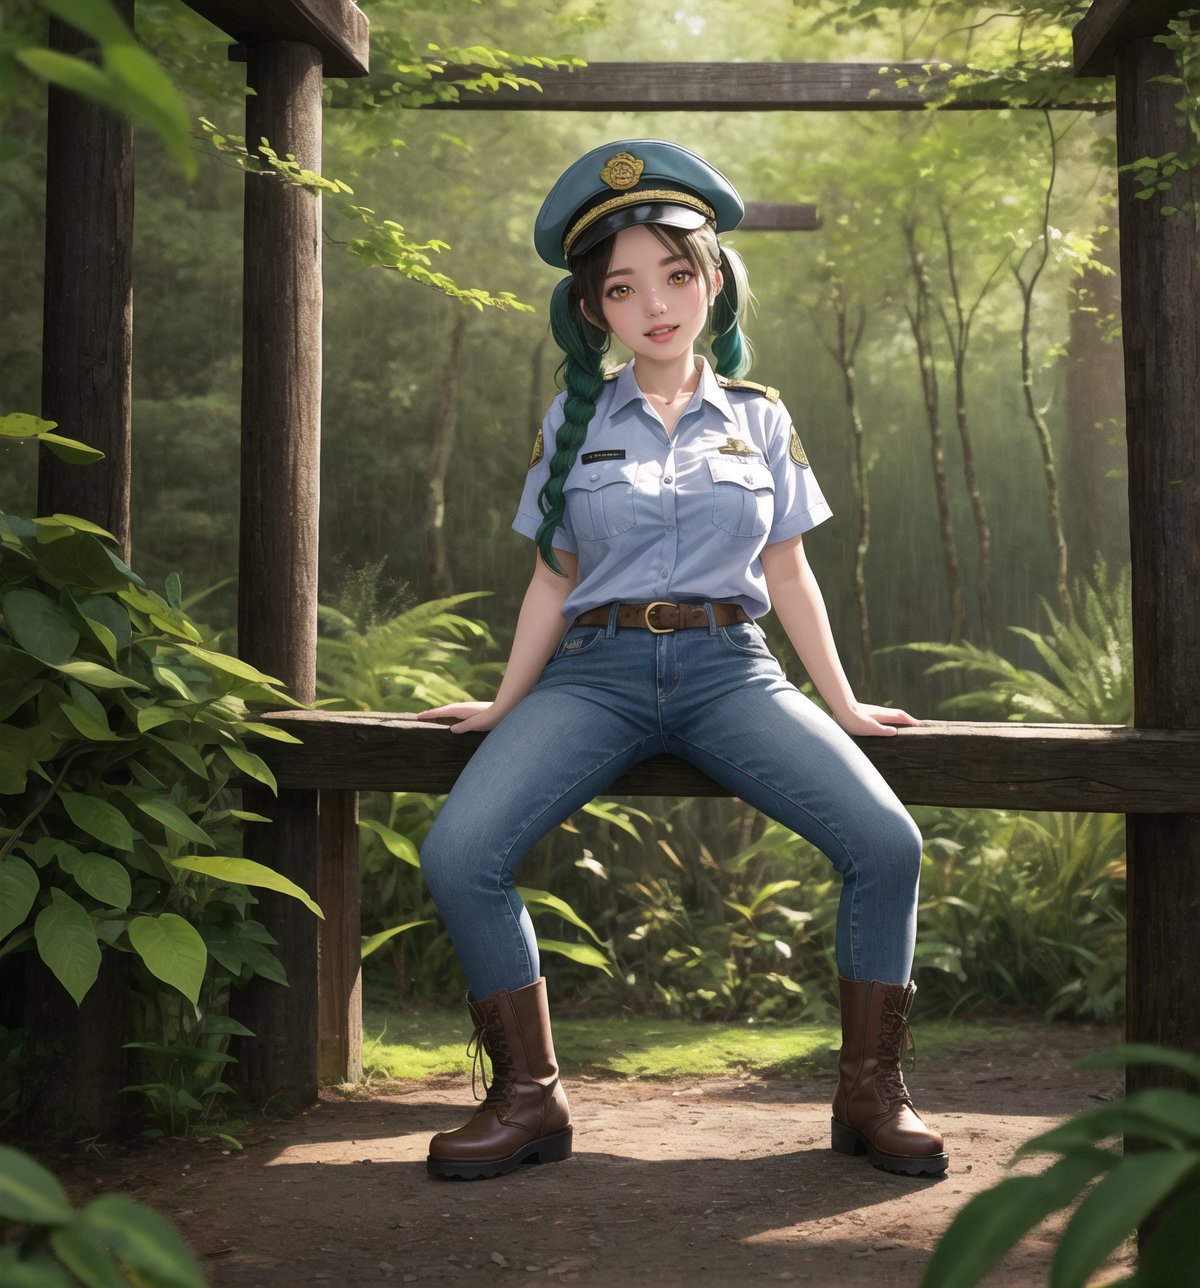 An ultra-detailed 8K masterpiece with fantasy and horror styles, rendered in ultra-high resolution with graphic detail. | Aya, a young 23-year-old woman, is dressed in a park ranger uniform consisting of a green and brown checkered shirt, blue jeans, brown leather boots and a green ranger hat. She has short blue hair, with two pigtails held together by silver barrettes, and a disheveled cut. ((Her golden eyes shine as she looks at the viewer, smiling and showing her white teeth)). It is located in a forest temple, surrounded by tall trees and rock structures. Tree trunks and wooden structures complete the natural environment, while concrete structures blend into the environment. Night has fallen and heavy rain falls, creating a dark and macabre atmosphere in the forest. | The image highlights Aya's imposing and sensual figure, contrasting with the dark and frightening environment of the forest temple. The rock, wooden and concrete structures, together with the vegetation and trees, create a mixed natural and artificial environment. The temple's artificial lighting creates dramatic shadows and highlights the details of the scene. | Soft, shadowy lighting effects create a tense, fear-filled atmosphere, while detailed textures on skin, fabrics, and structures add realism to the image. | A sensual and terrifying scene of a young ranger in a forest temple, exploring themes of fantasy and horror. | (((The image reveals a full-body shot as Aya assumes a sensual pose, engagingly leaning against a structure within the scene in an exciting manner. She takes on a sensual pose as she interacts, boldly leaning on a structure, leaning back and boldly throwing herself onto the structure, reclining back in an exhilarating way.))). | ((((full-body shot)))), ((perfect pose)), ((perfect arms):1.2), ((perfect limbs, perfect fingers, better hands, perfect hands, hands)), ((perfect legs, perfect feet):1.2), ((perfect design)), ((perfect composition)), ((very detailed scene, very detailed background, perfect layout, correct imperfections)), Enhance, Ultra details++, More Detail, poakl